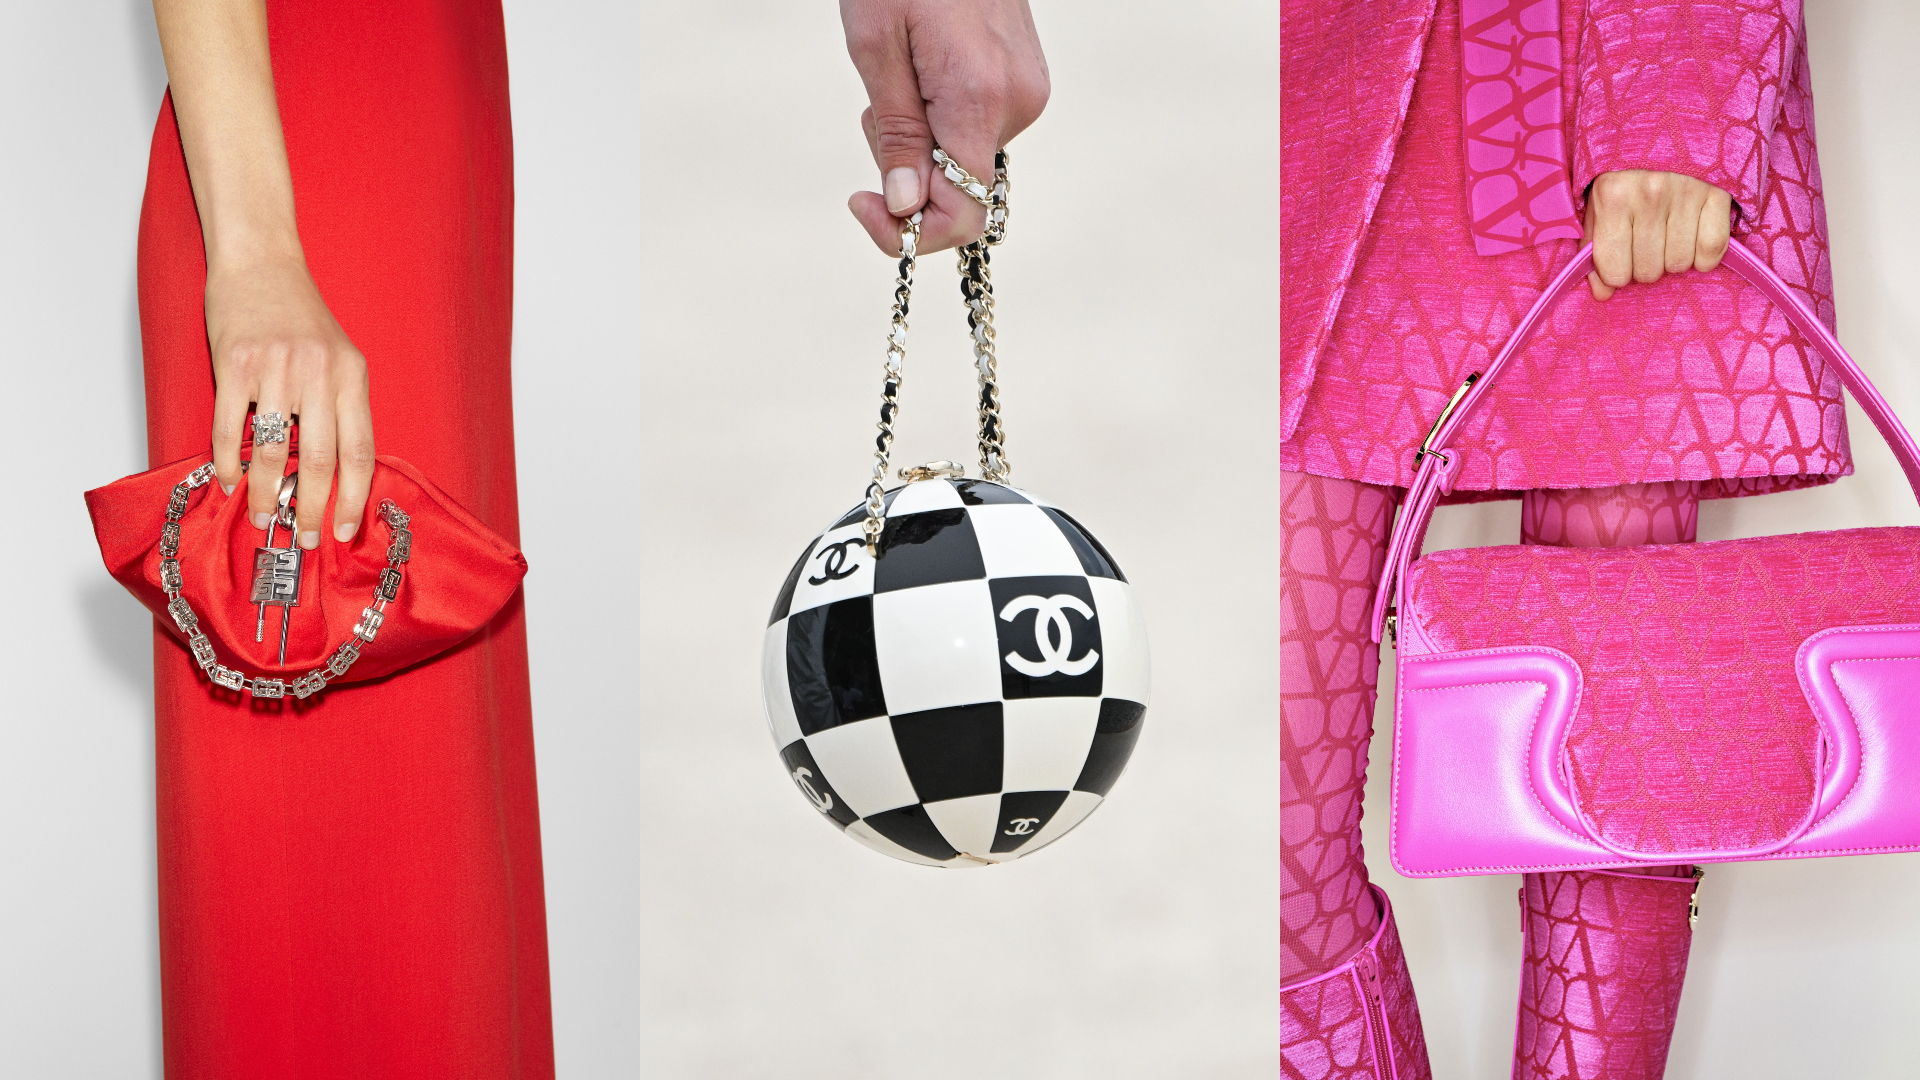 The Handbag Trends for Winter 2022-2023 Are Playful and Experimental